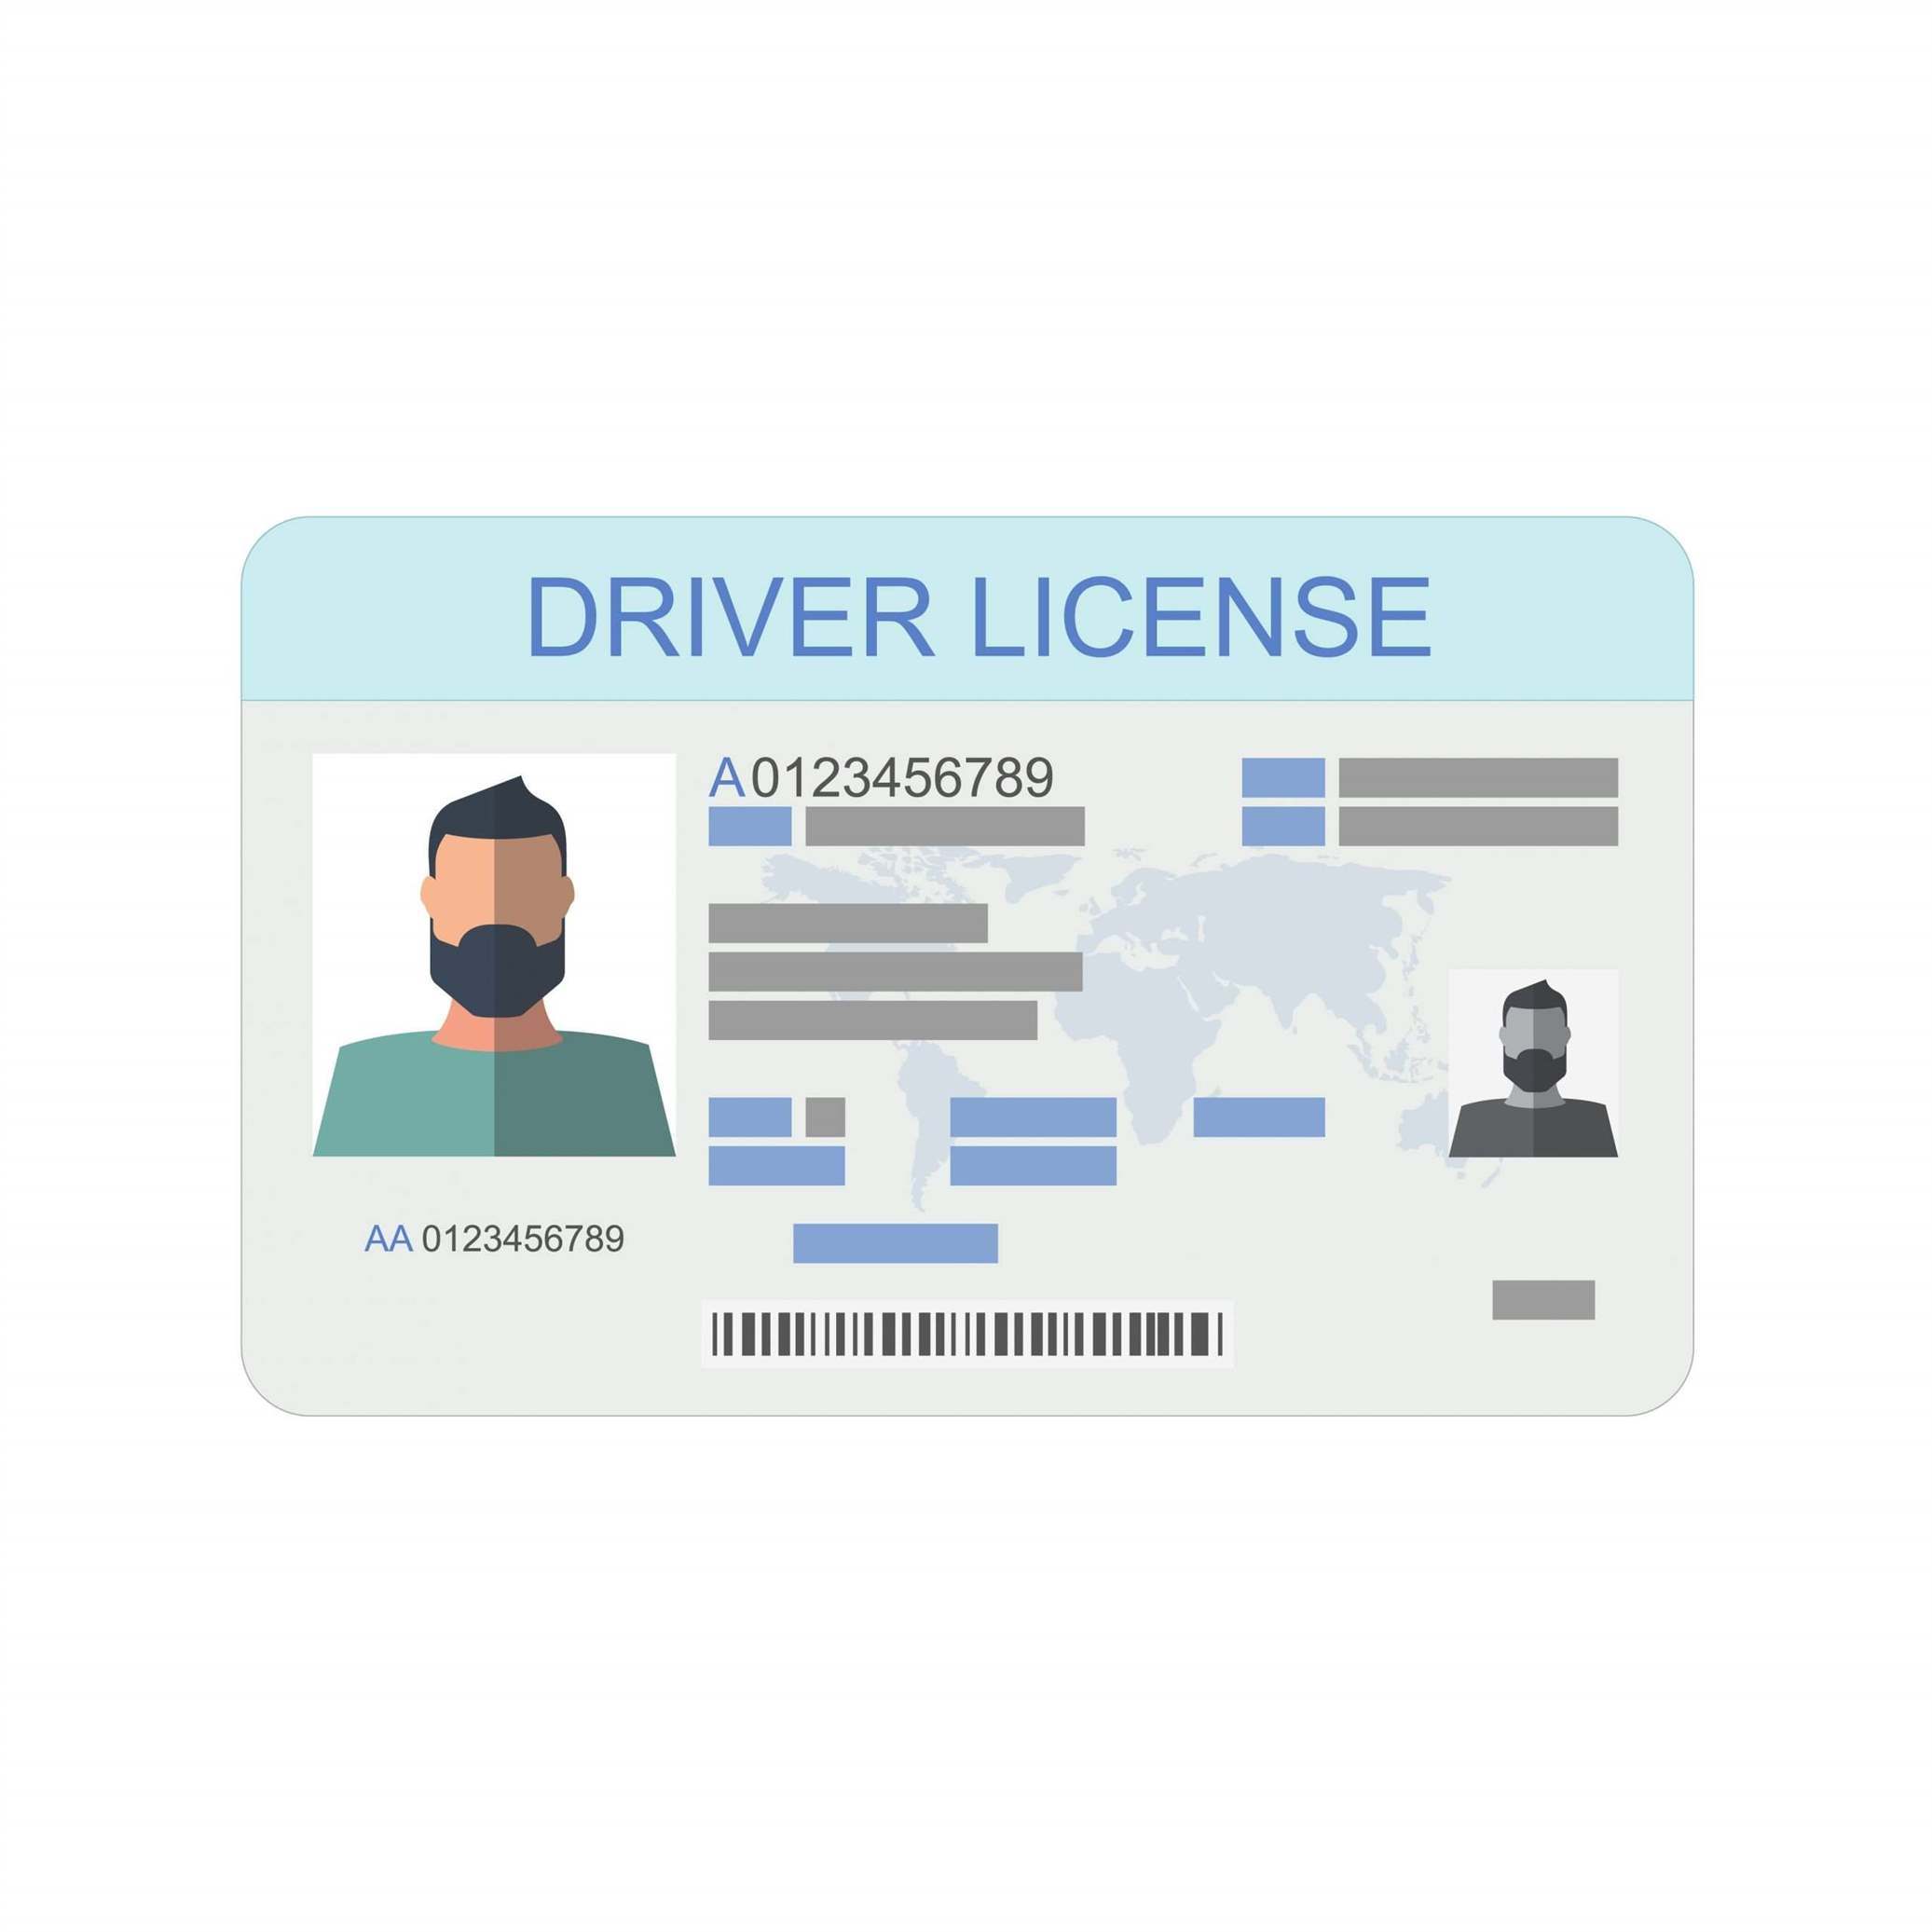 Driving Without a Valid Driver's License in Florida - Leifert